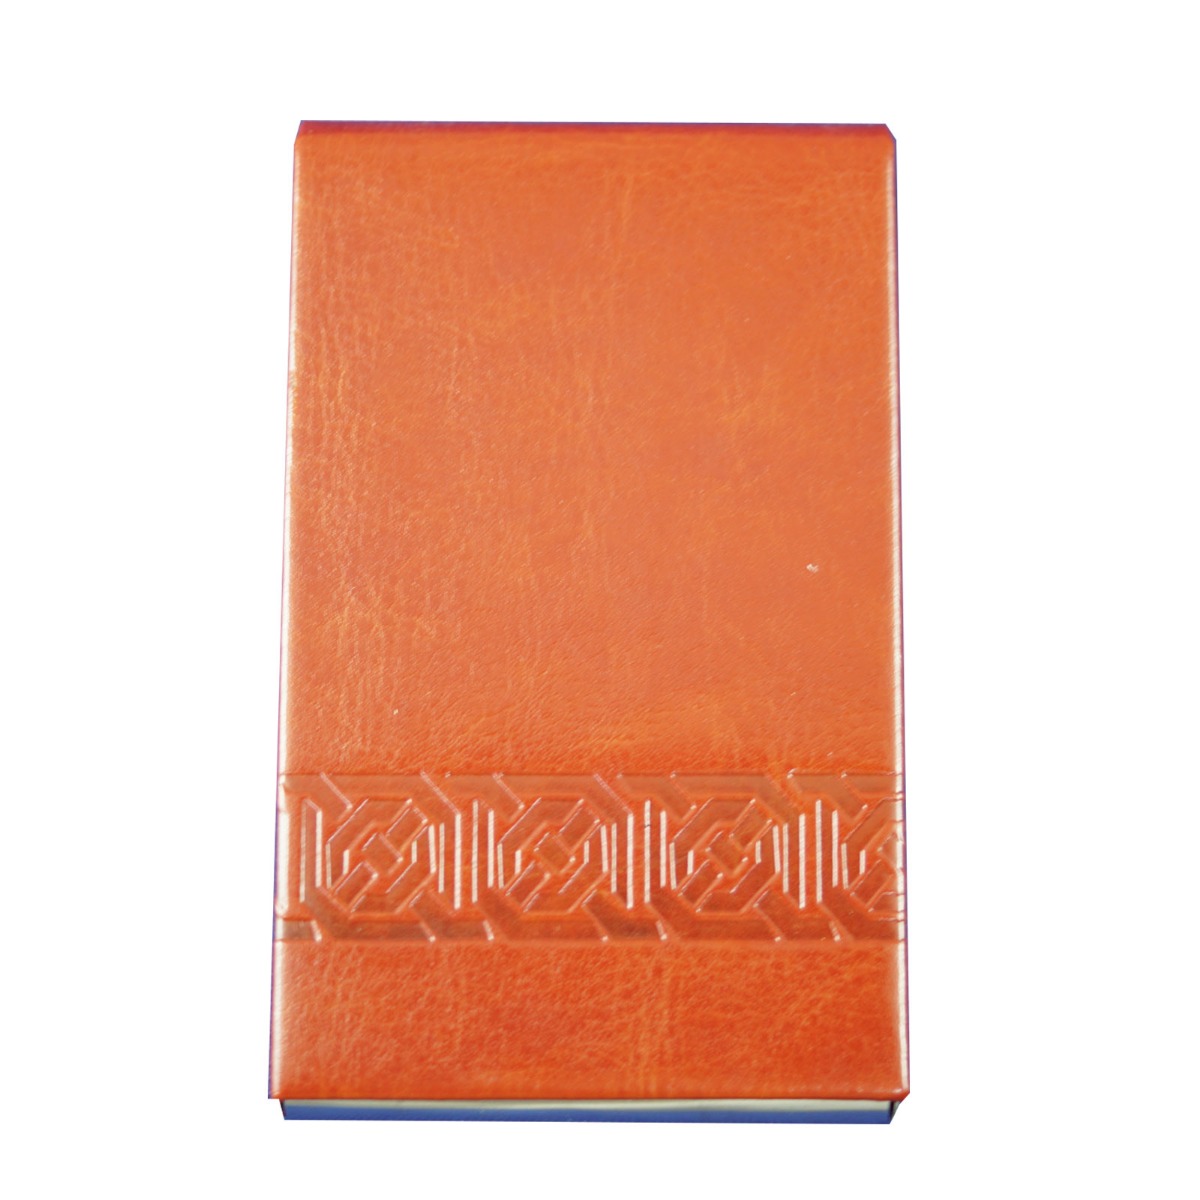 Penhouse Model No:87010  Coral Red  Color Body  Card holder 